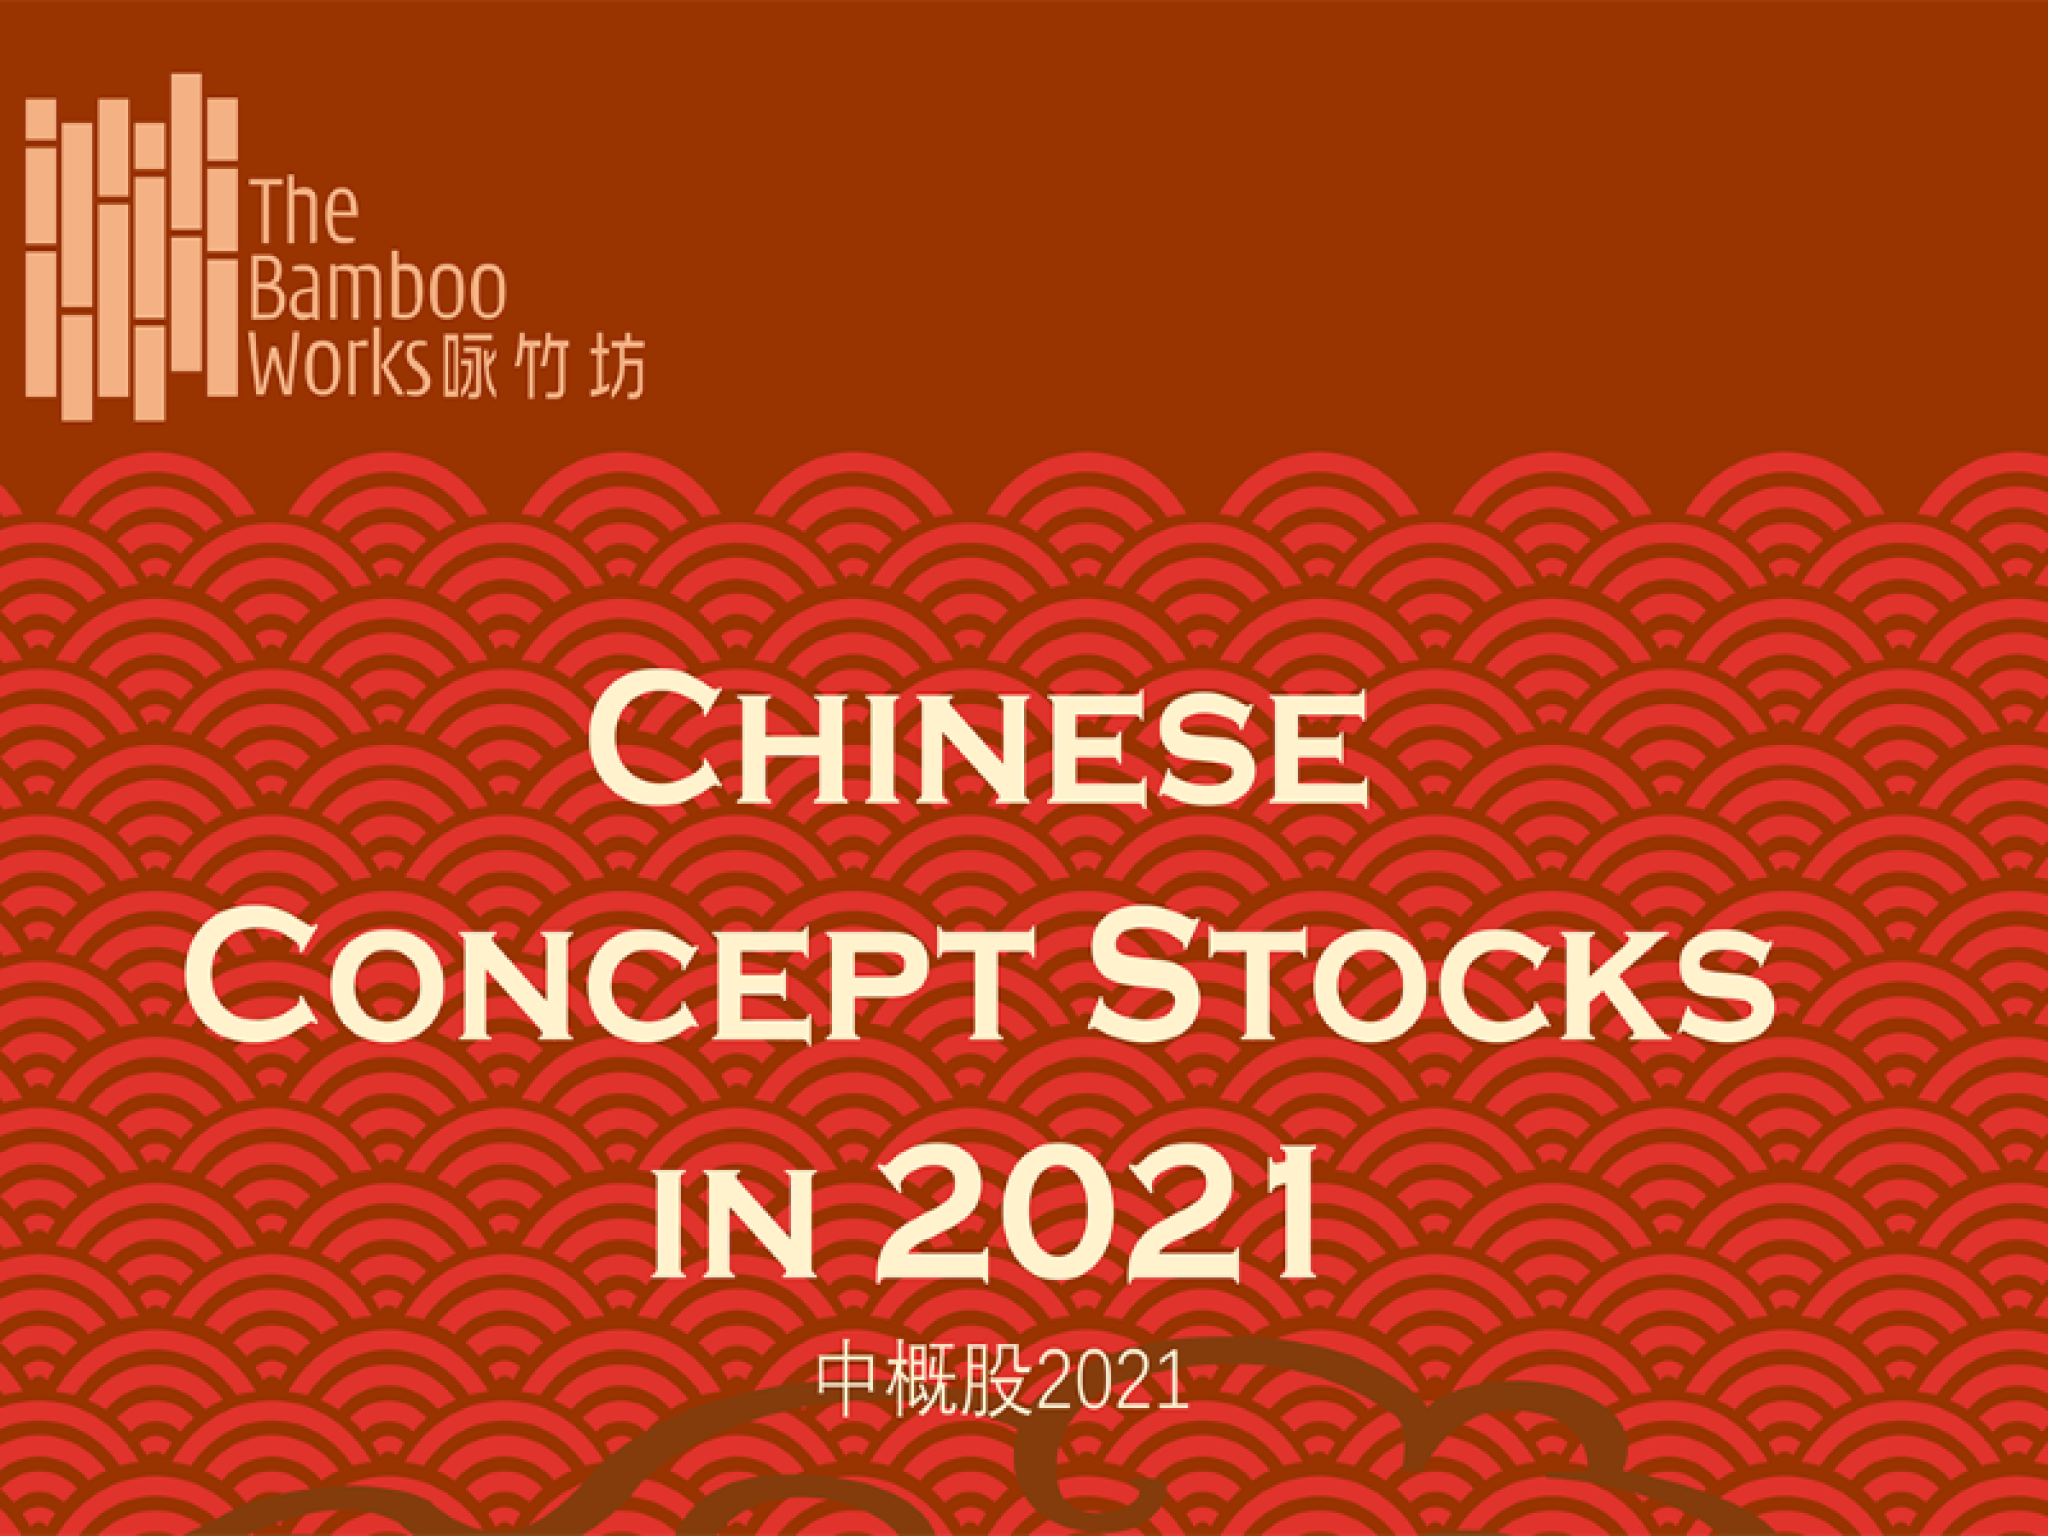  new-energy-lands-as-hottest-category-among-chinese-concept-stocks-in-2021--bamboo-works-special-report 